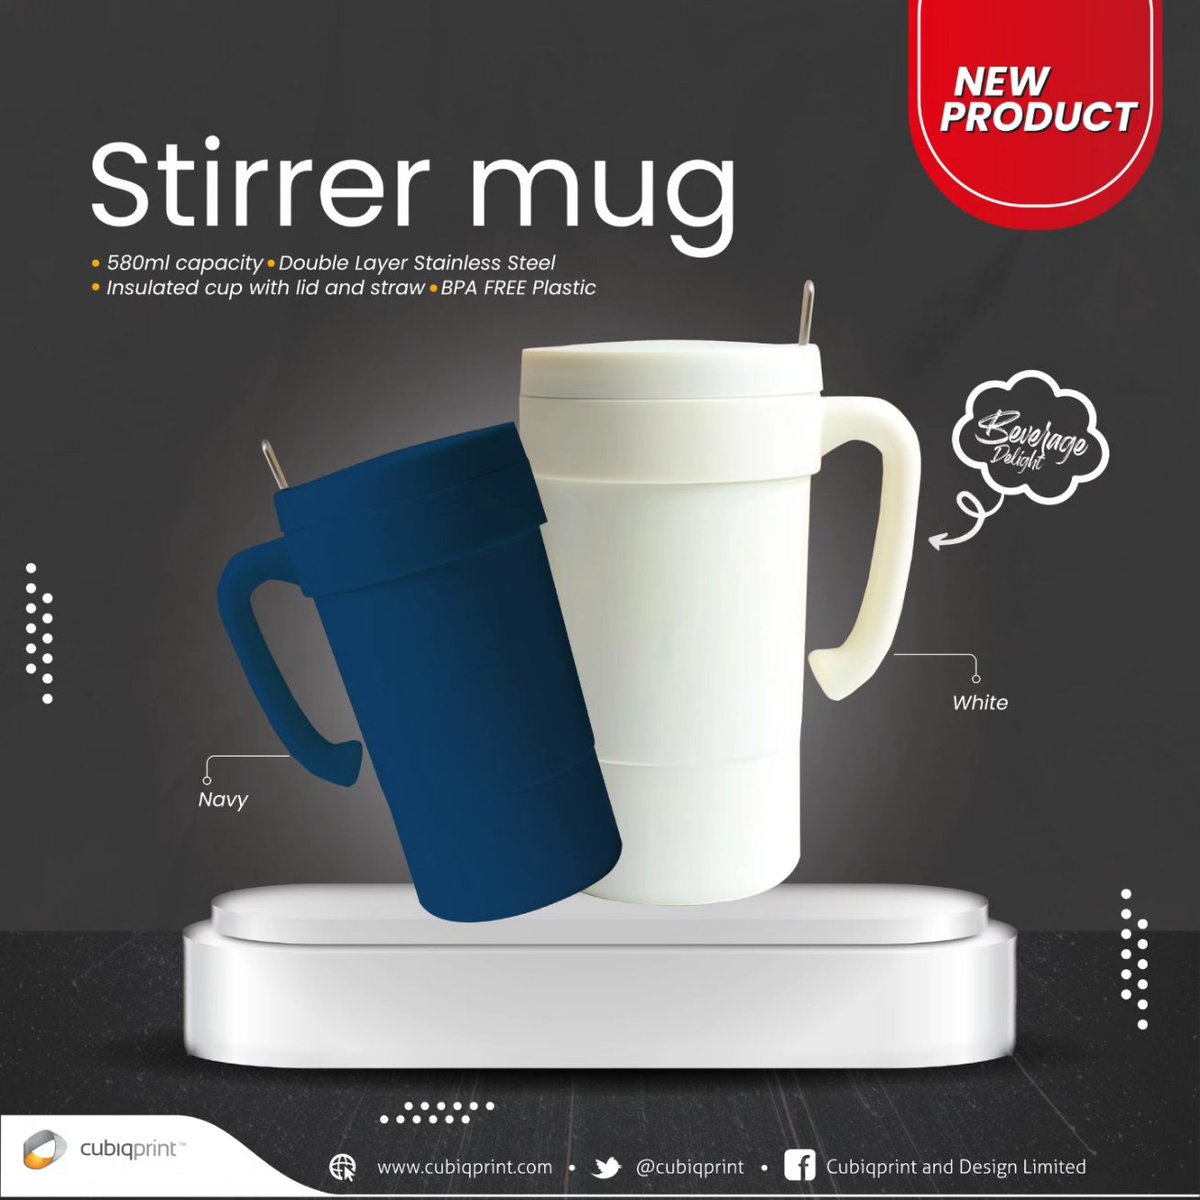 Sip. Smile. Repeat

With our wide range of Mugs for all your beverage needs 😉

Talk to us today on 0204400188 or info@cubiqprint.com 

#coffeemugs #coffeegram #tealover #promotionalproductswork #promotionalitems #promotionalgifts #promotionalproducts #cubiqpromo